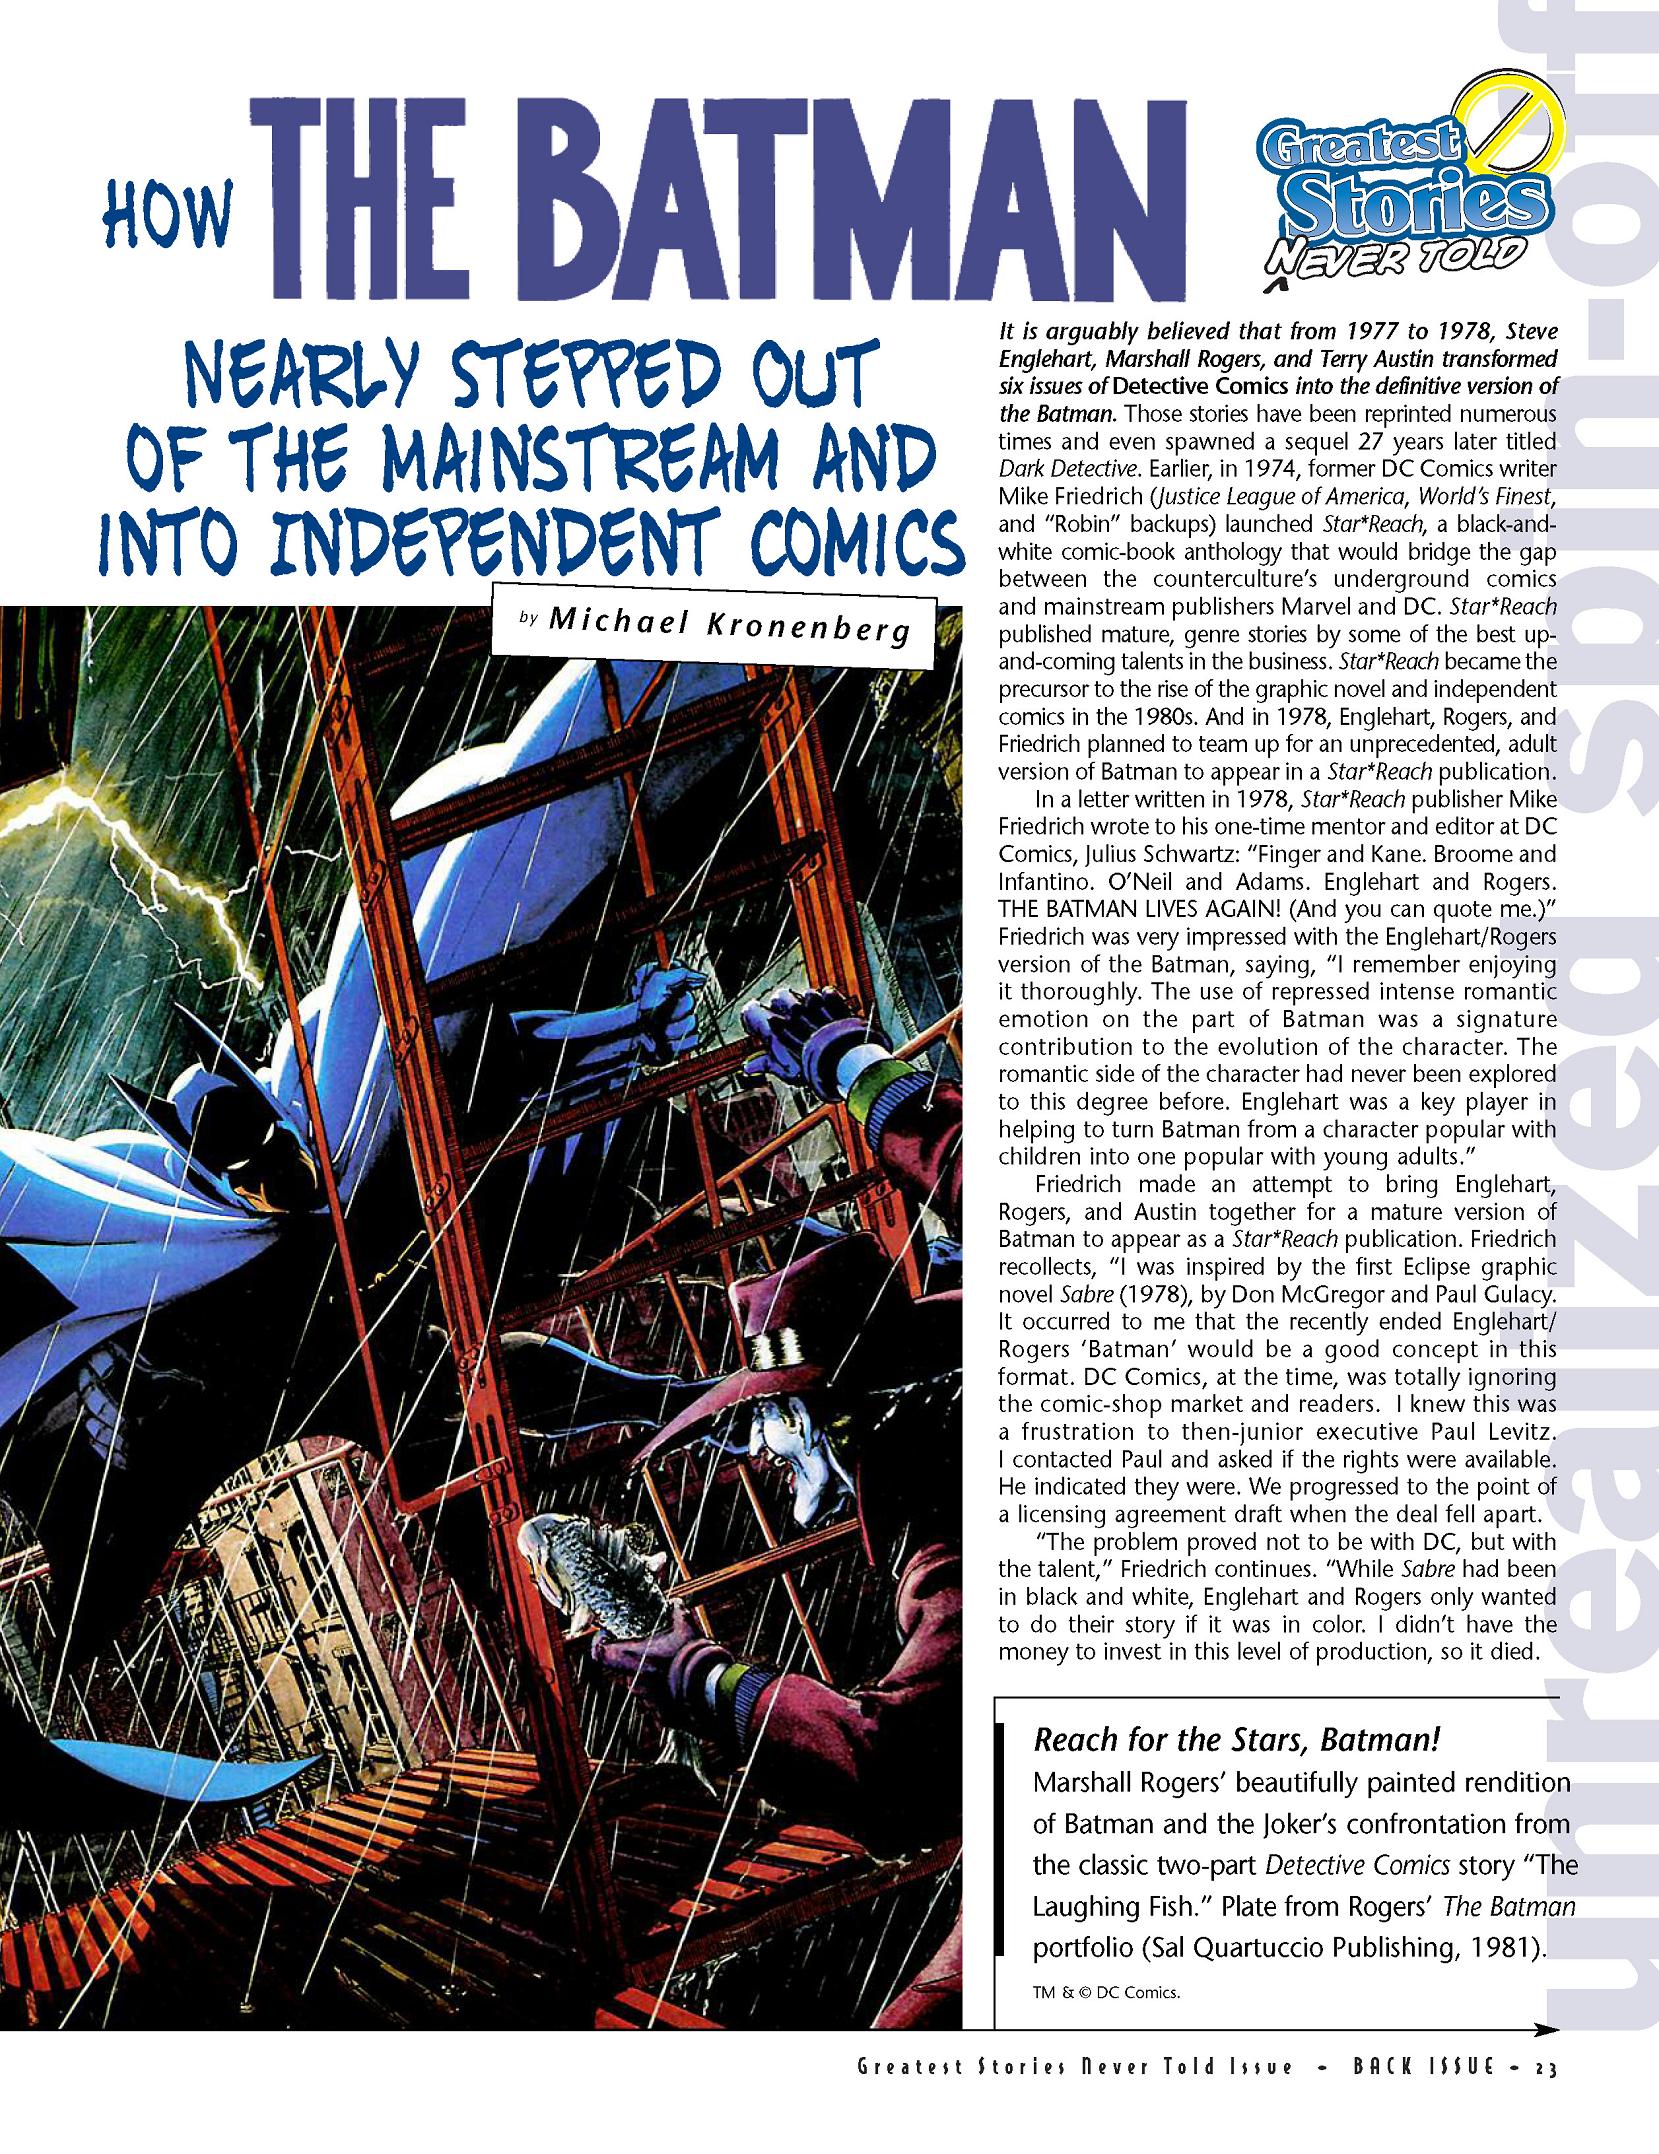 Read online Back Issue comic -  Issue #46 - 25